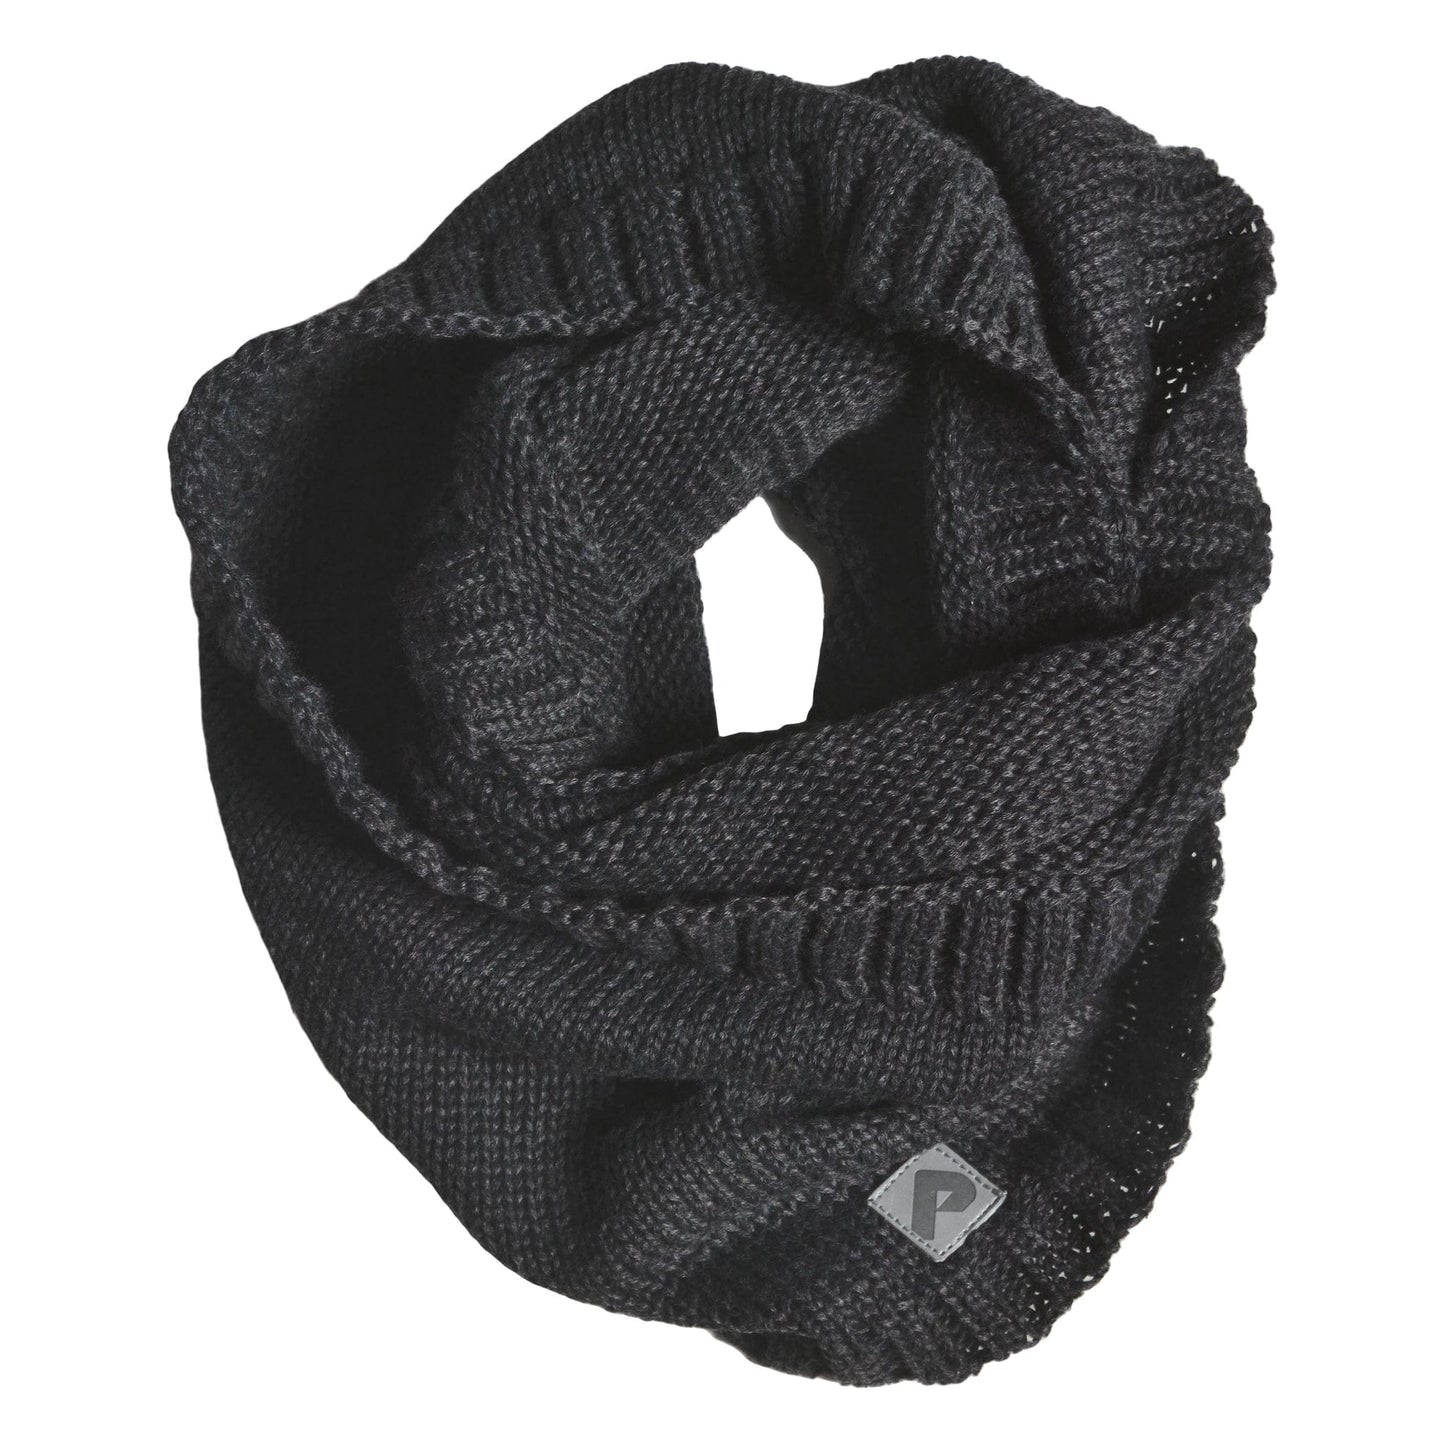 Knitted infinity scarf - Charbon